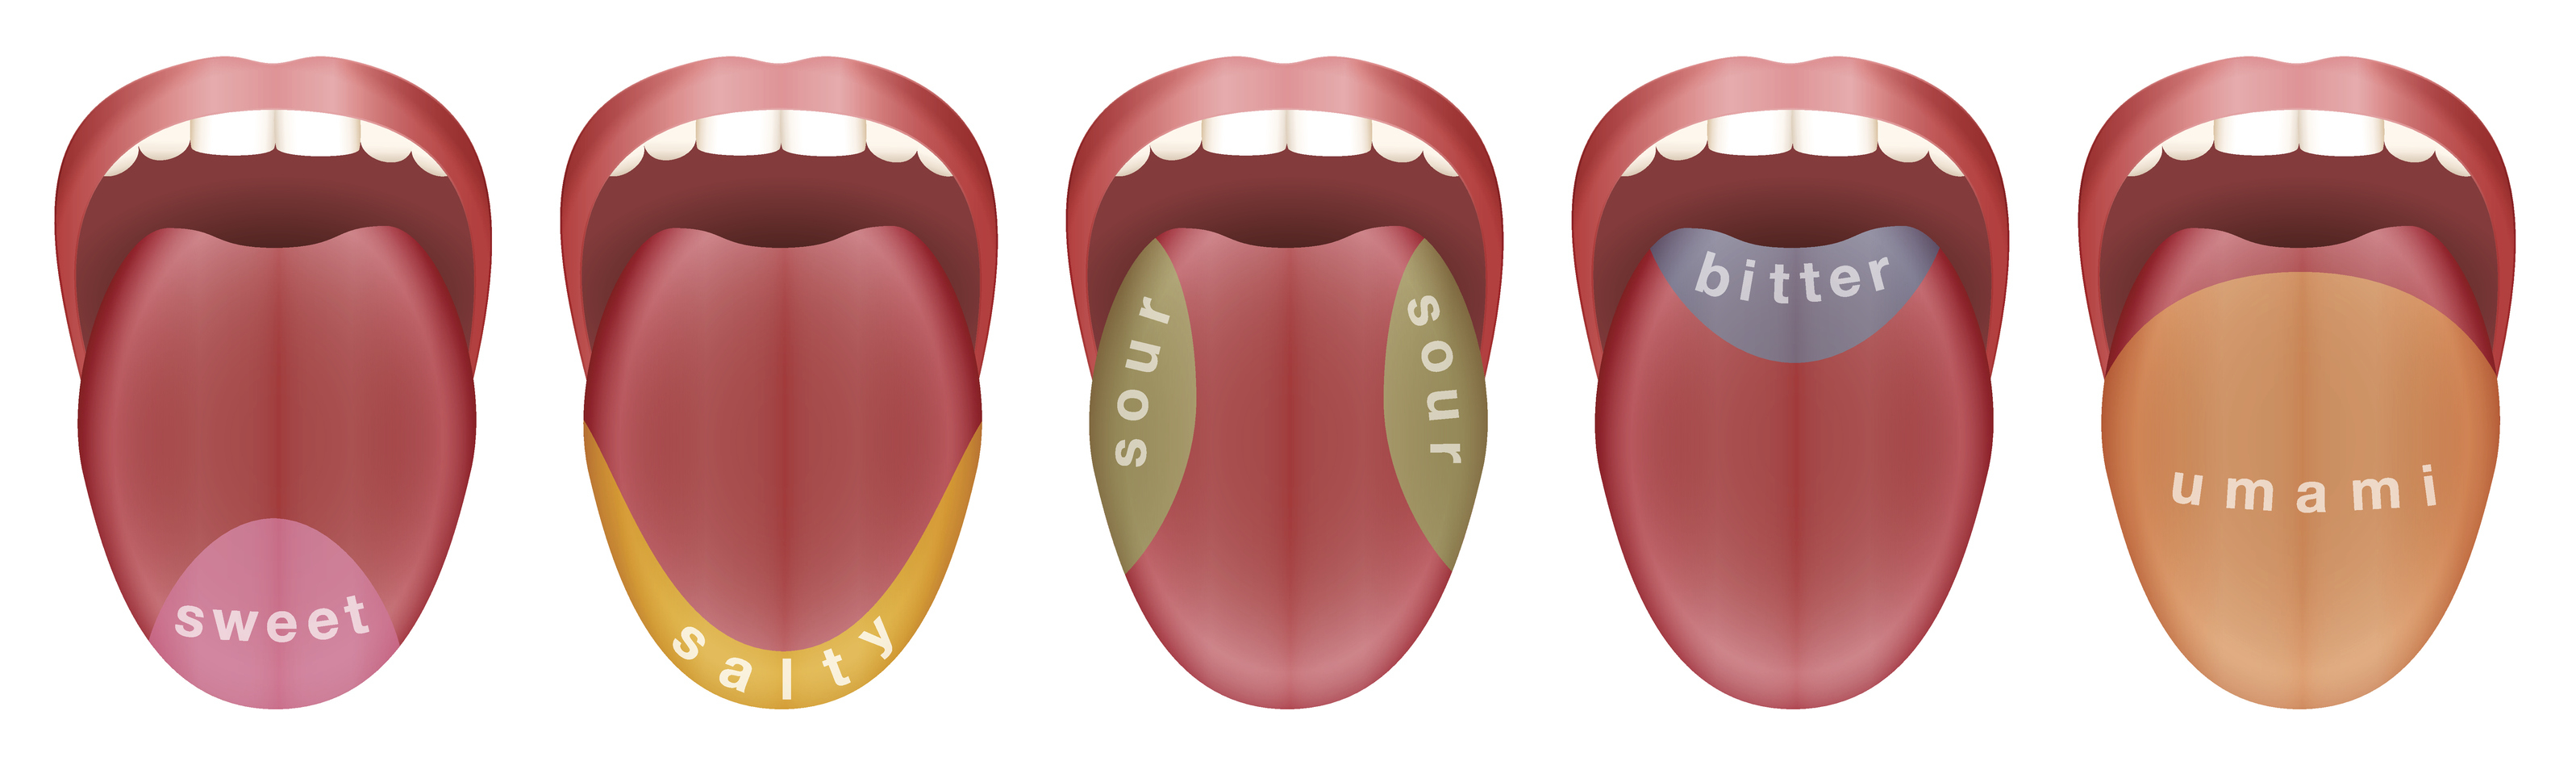 Five illustrations showing, sweet, salty, sour, bitter, and umami sections of the tongue